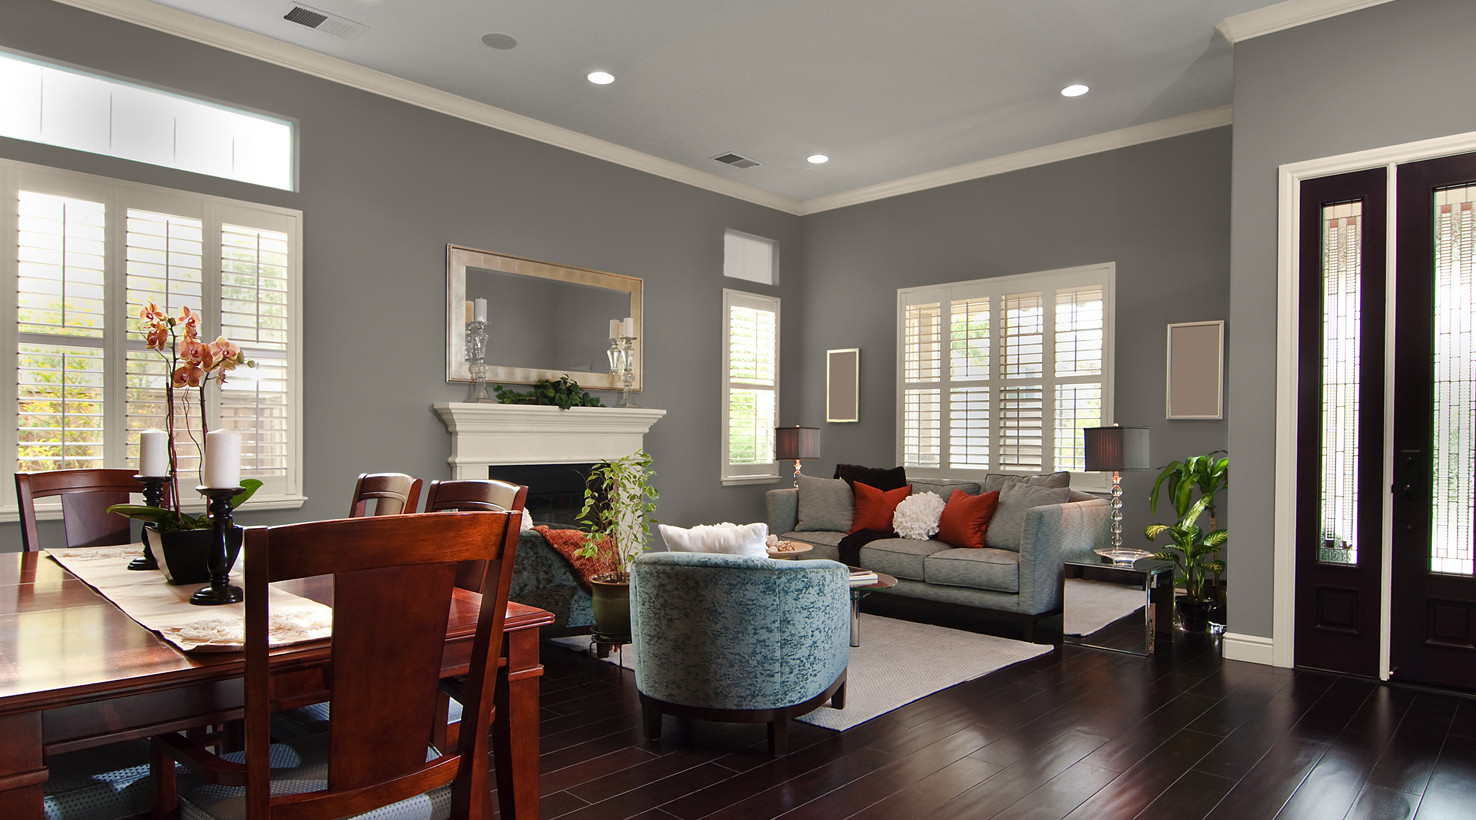 Top Living Room Colors
 Living Room Paint Color Ideas